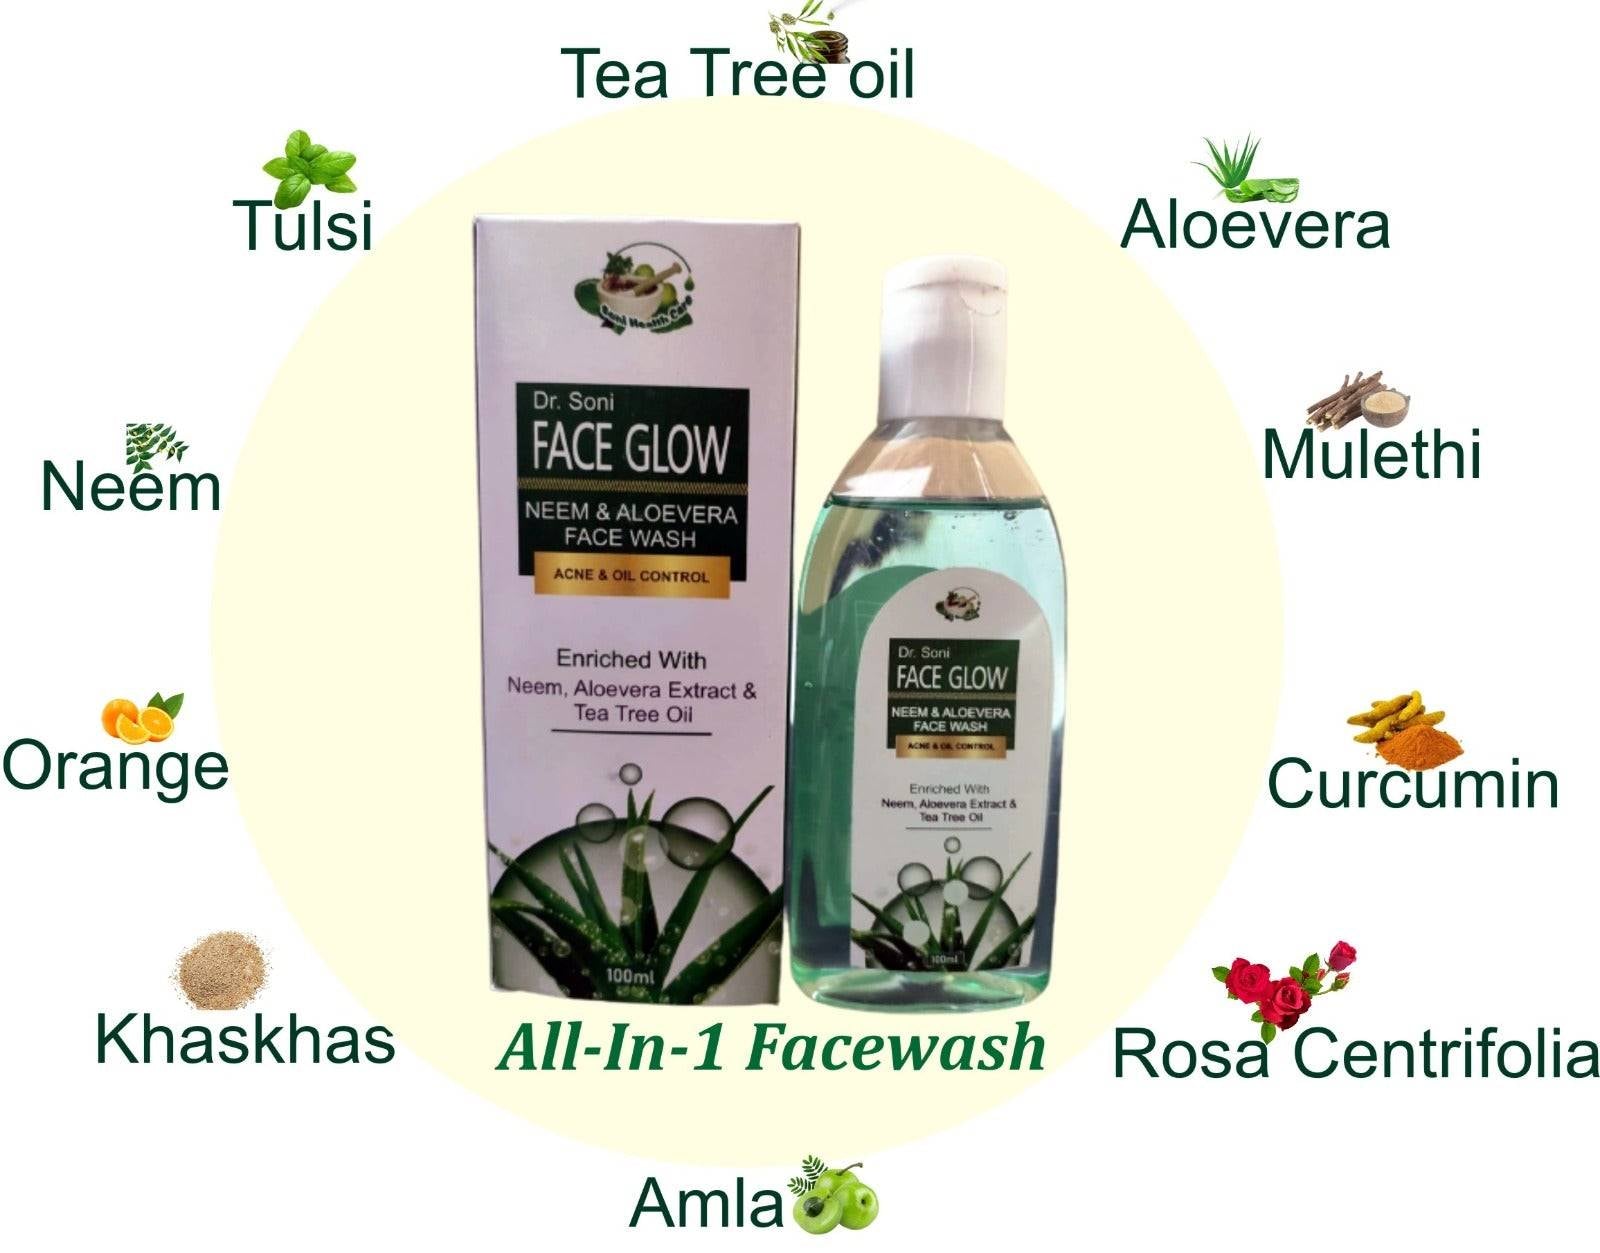 Dr.Soni Face Glow Neem And Aloevera Face Wash